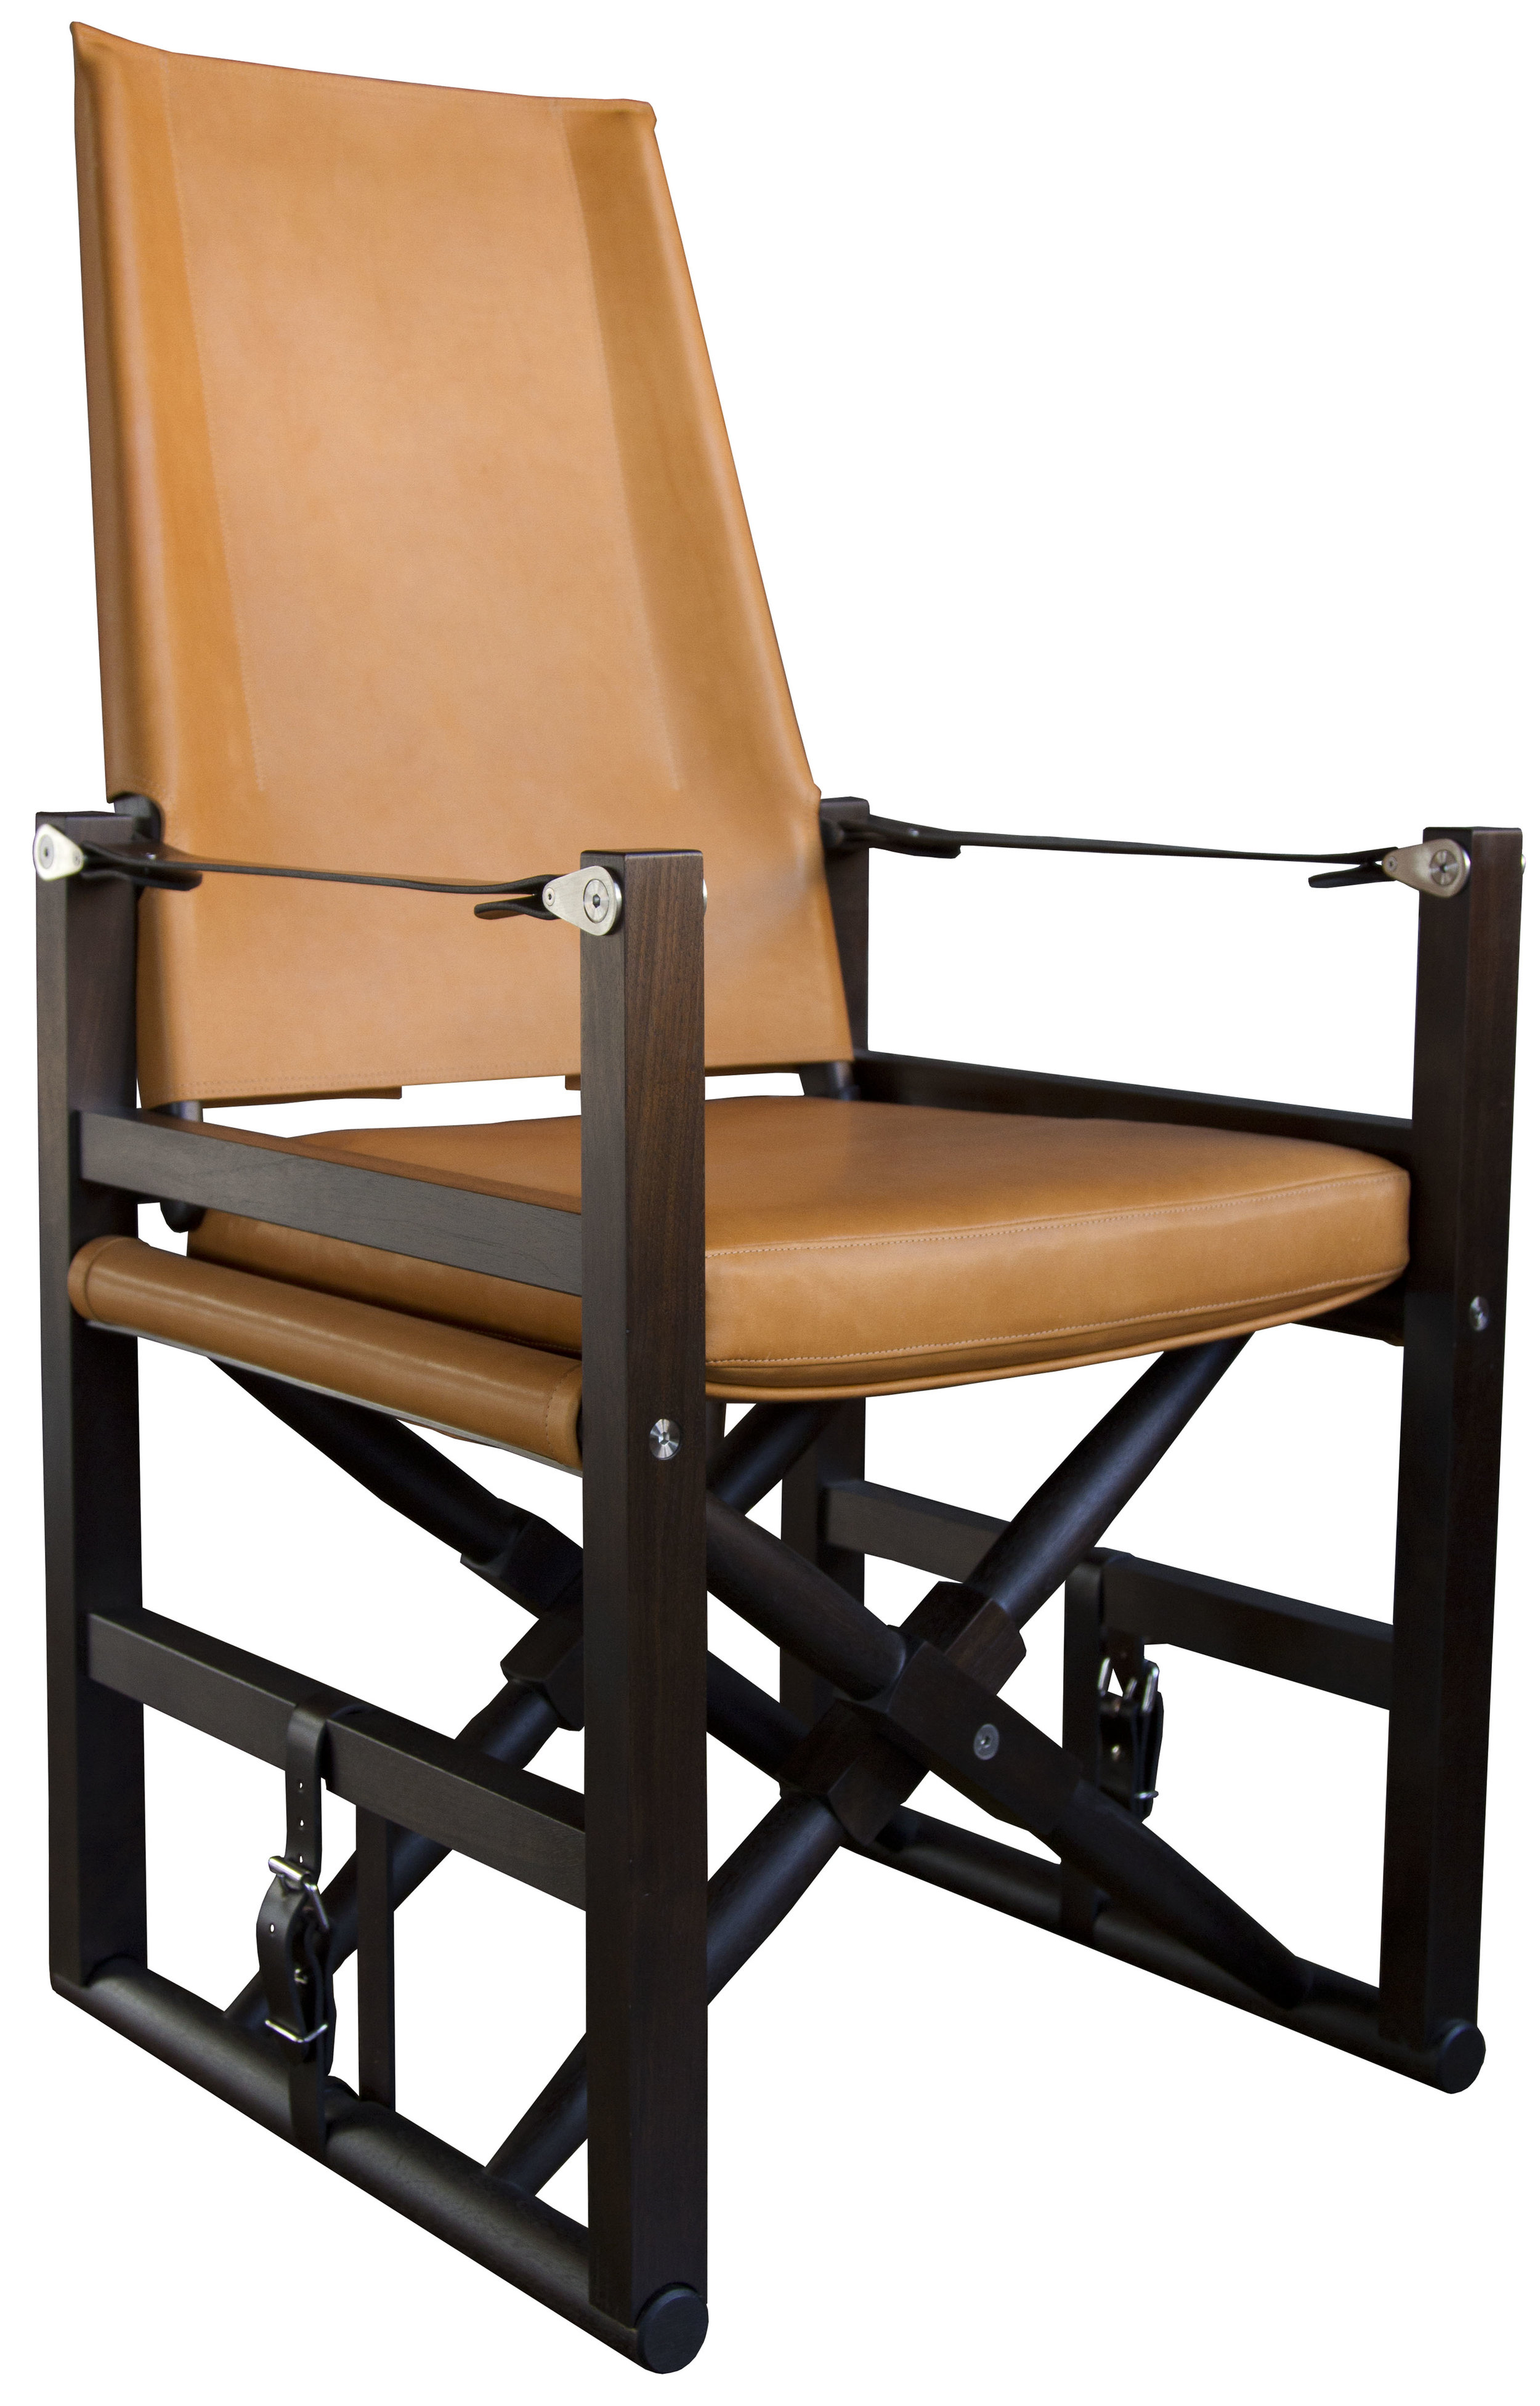 High-Back Cabourn Folding Chair